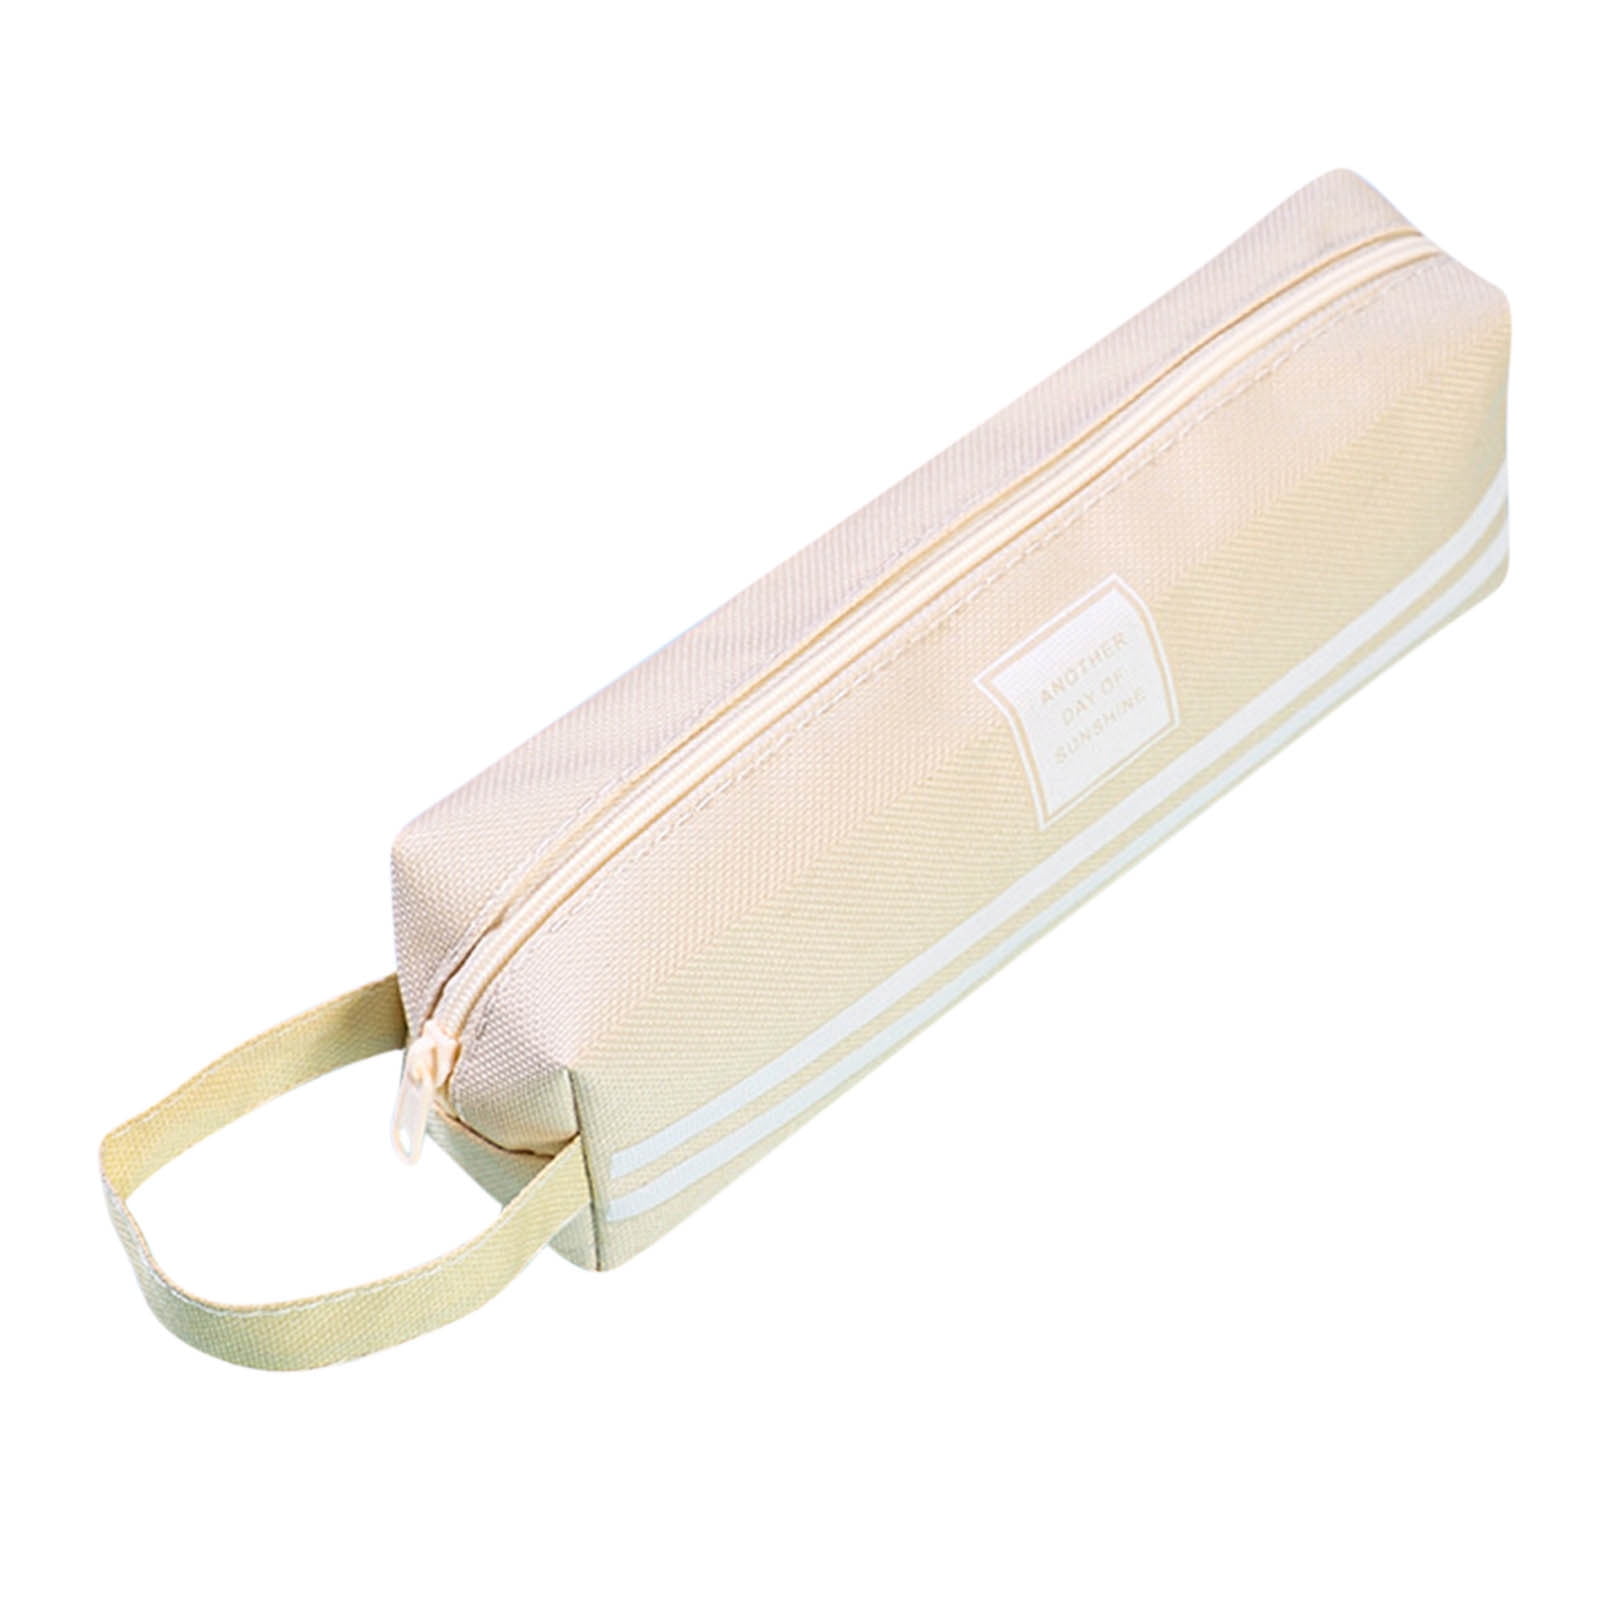 Dezsed Pencil Pouch School Supplies Pencil Case Student Pencil Bag Coin Bag  Cosmetic Bag Office Stationery Storage Bag Youth School White